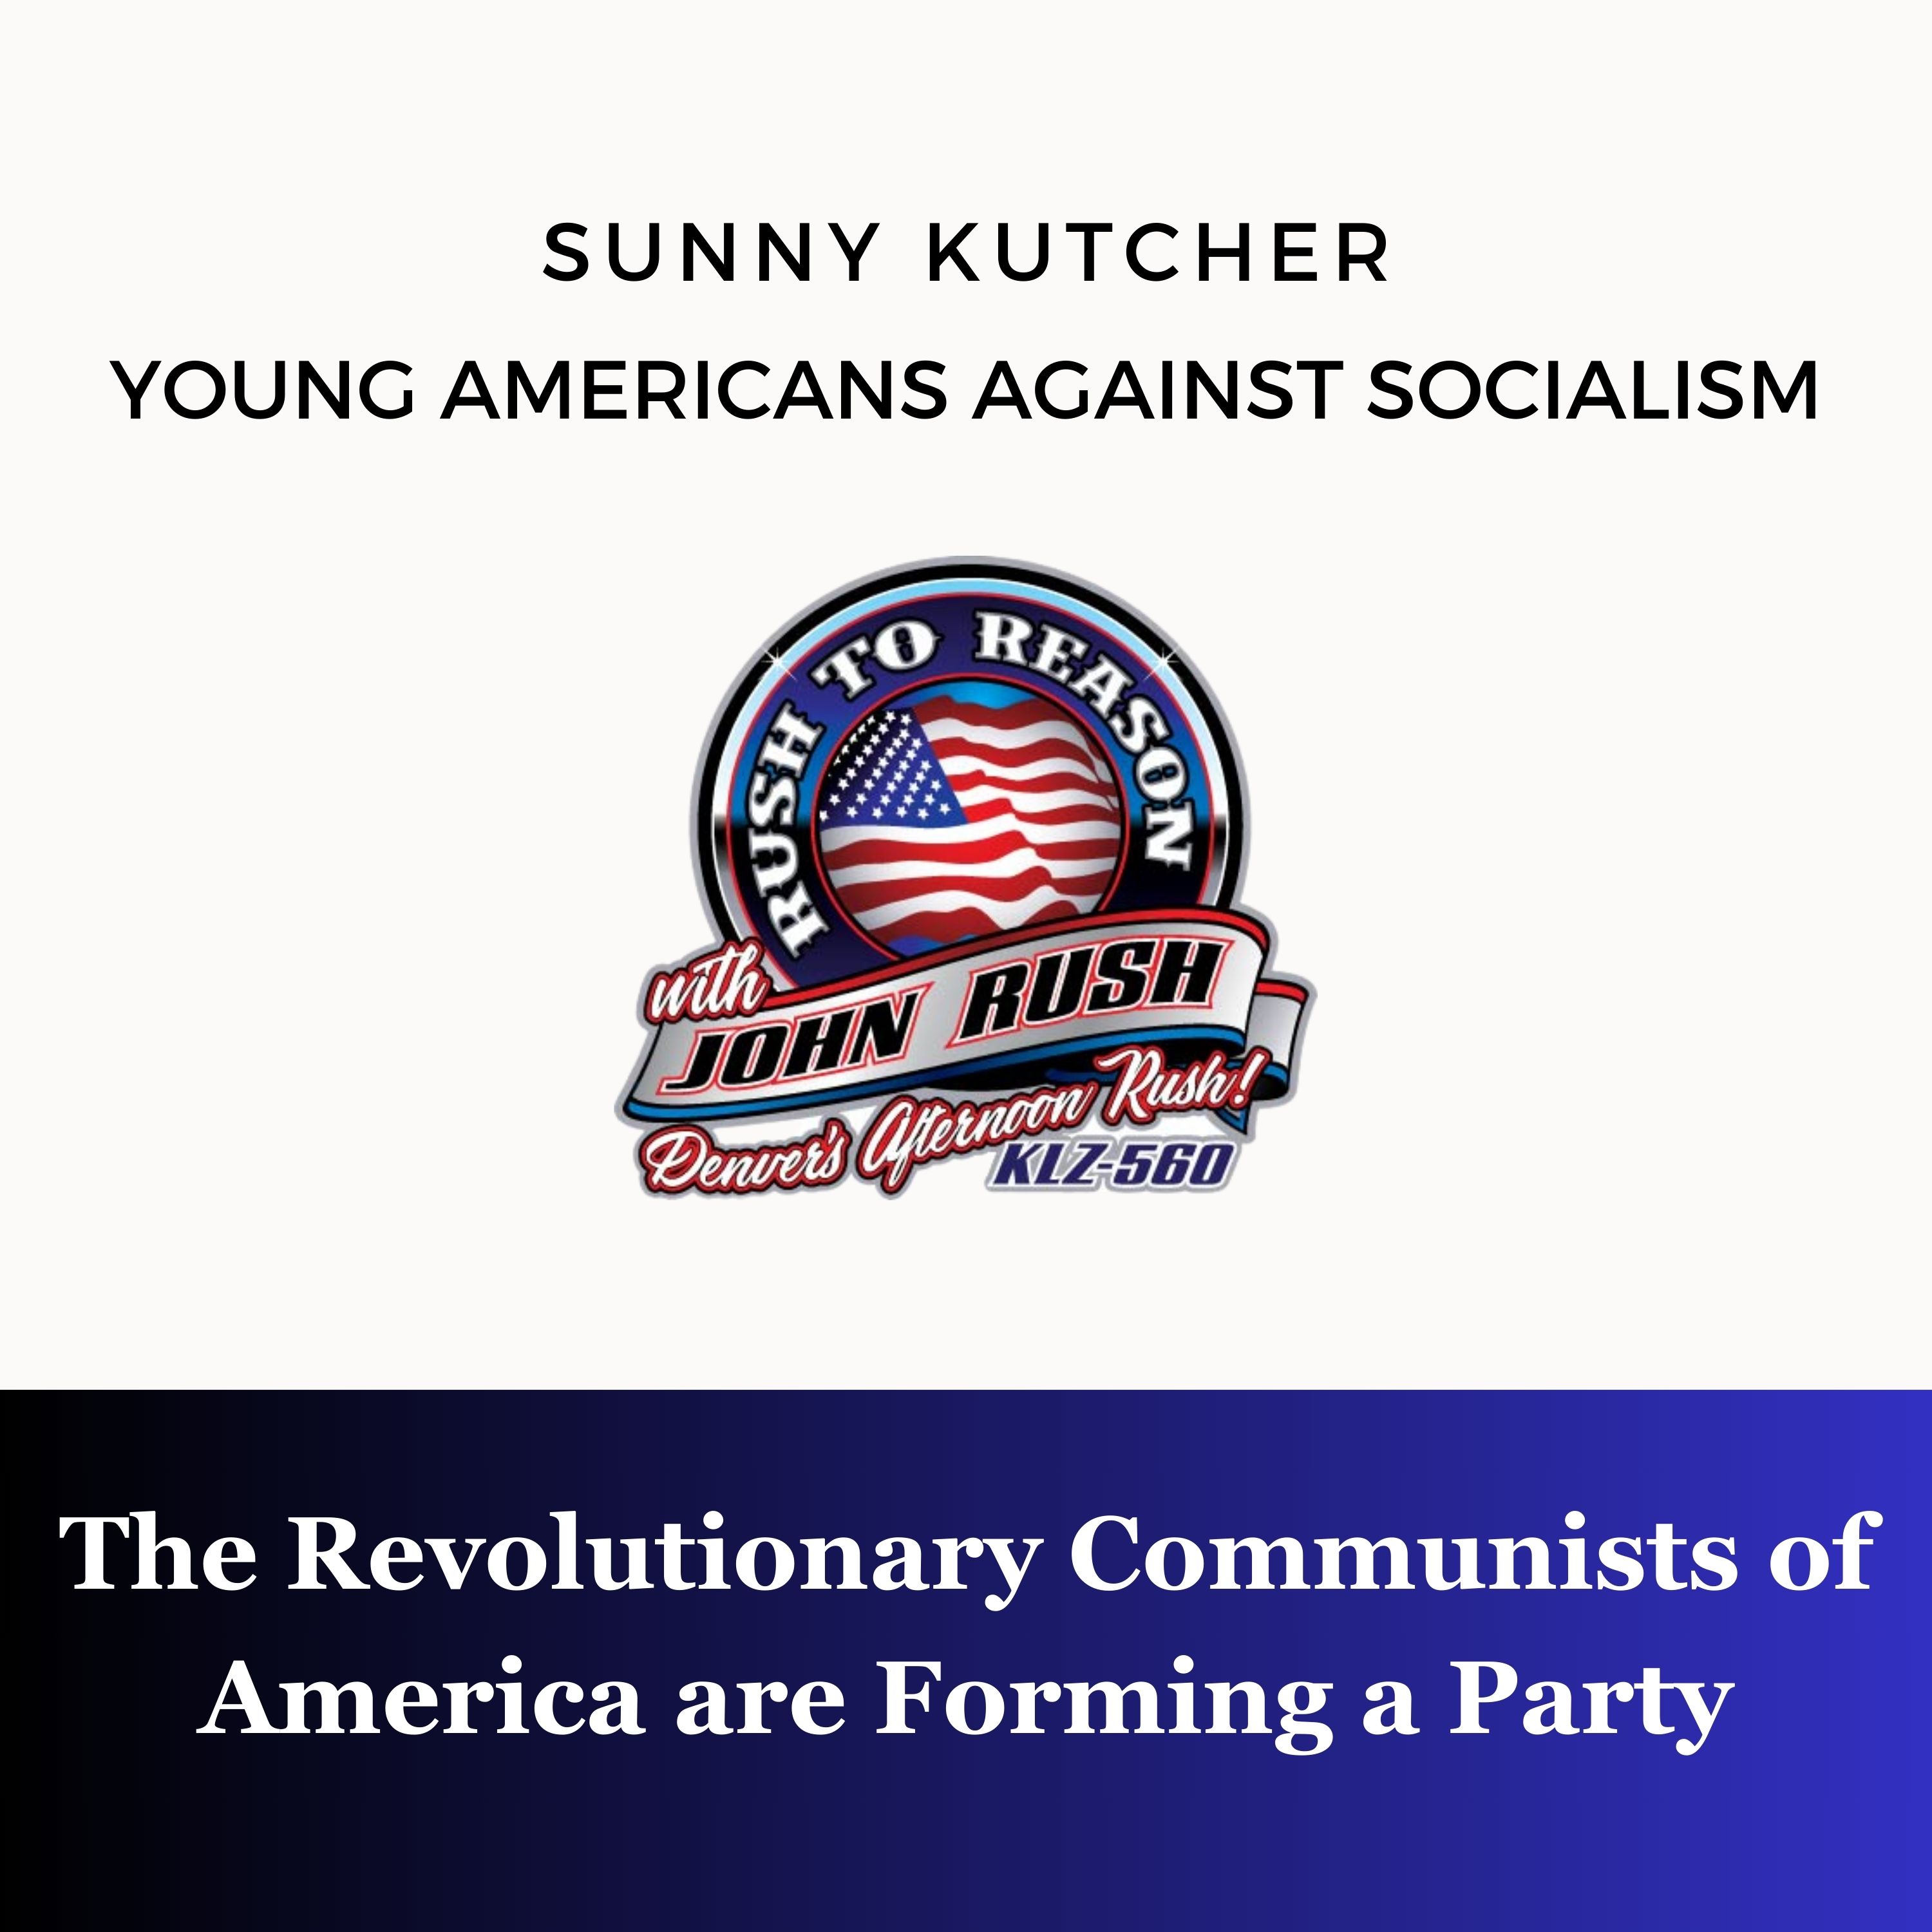 The Revolutionary Communists of America are Forming a Party